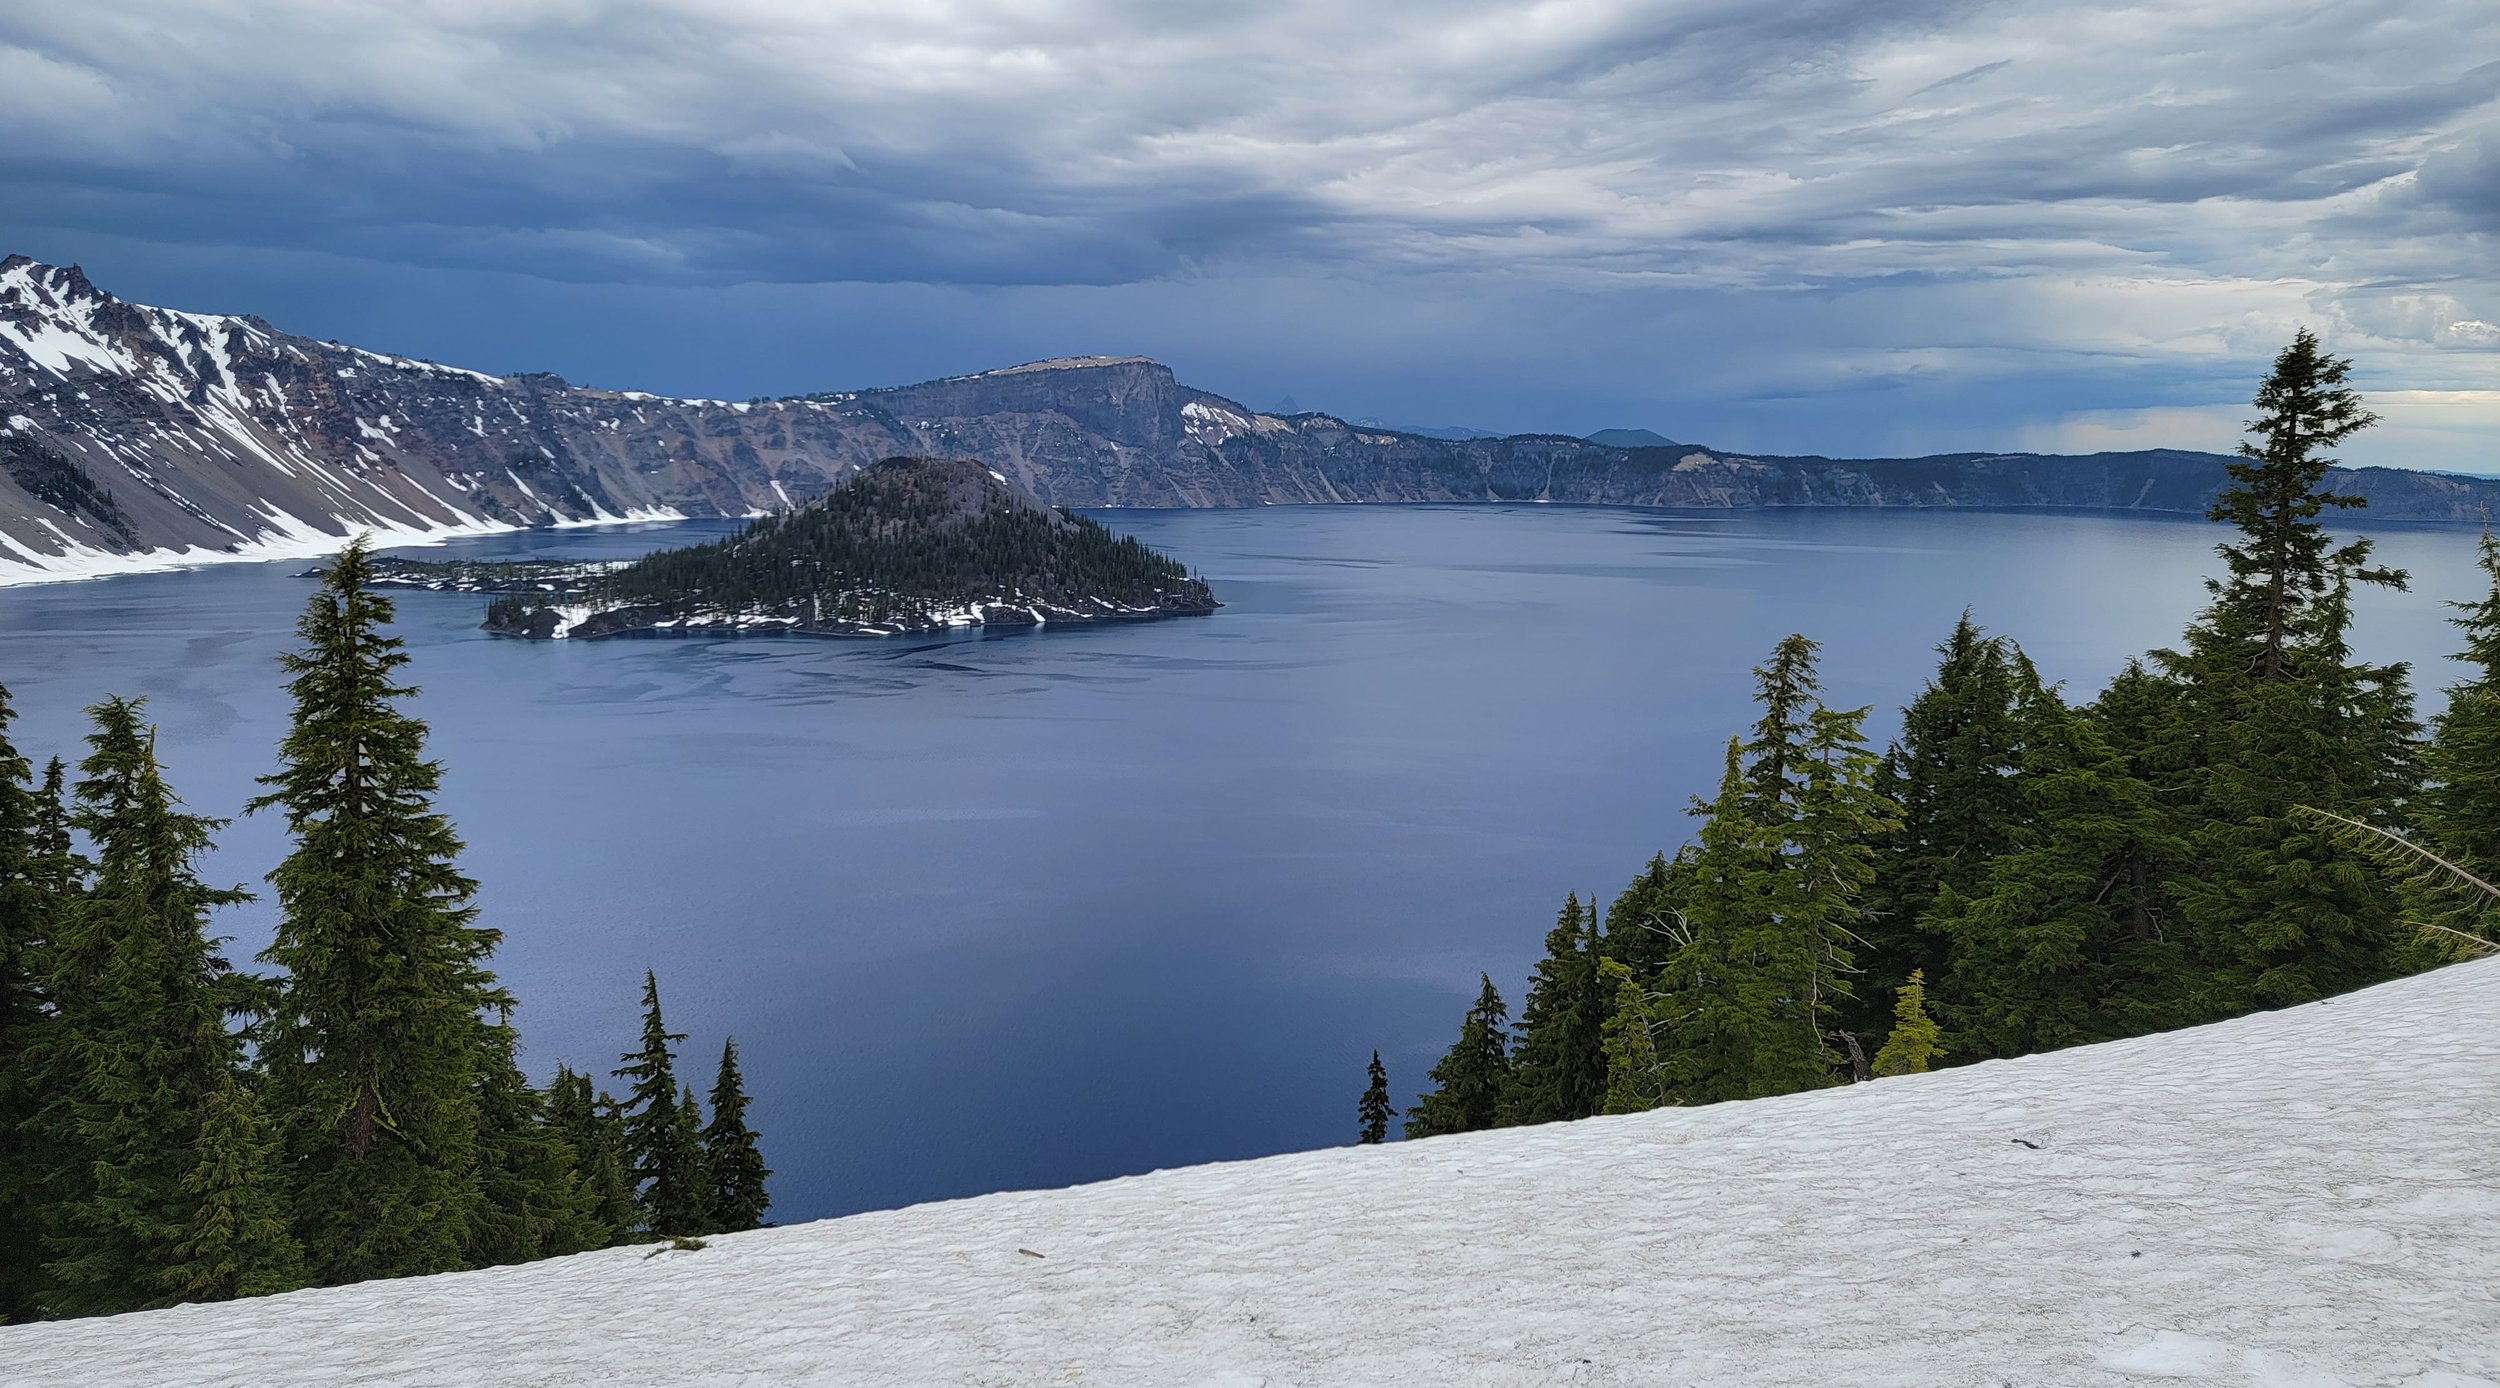  Drove all the way up to Crater Lake hoping there wouldn’t be rain. It poured the entire time until I literally got about 2 miles from the fee hut.  